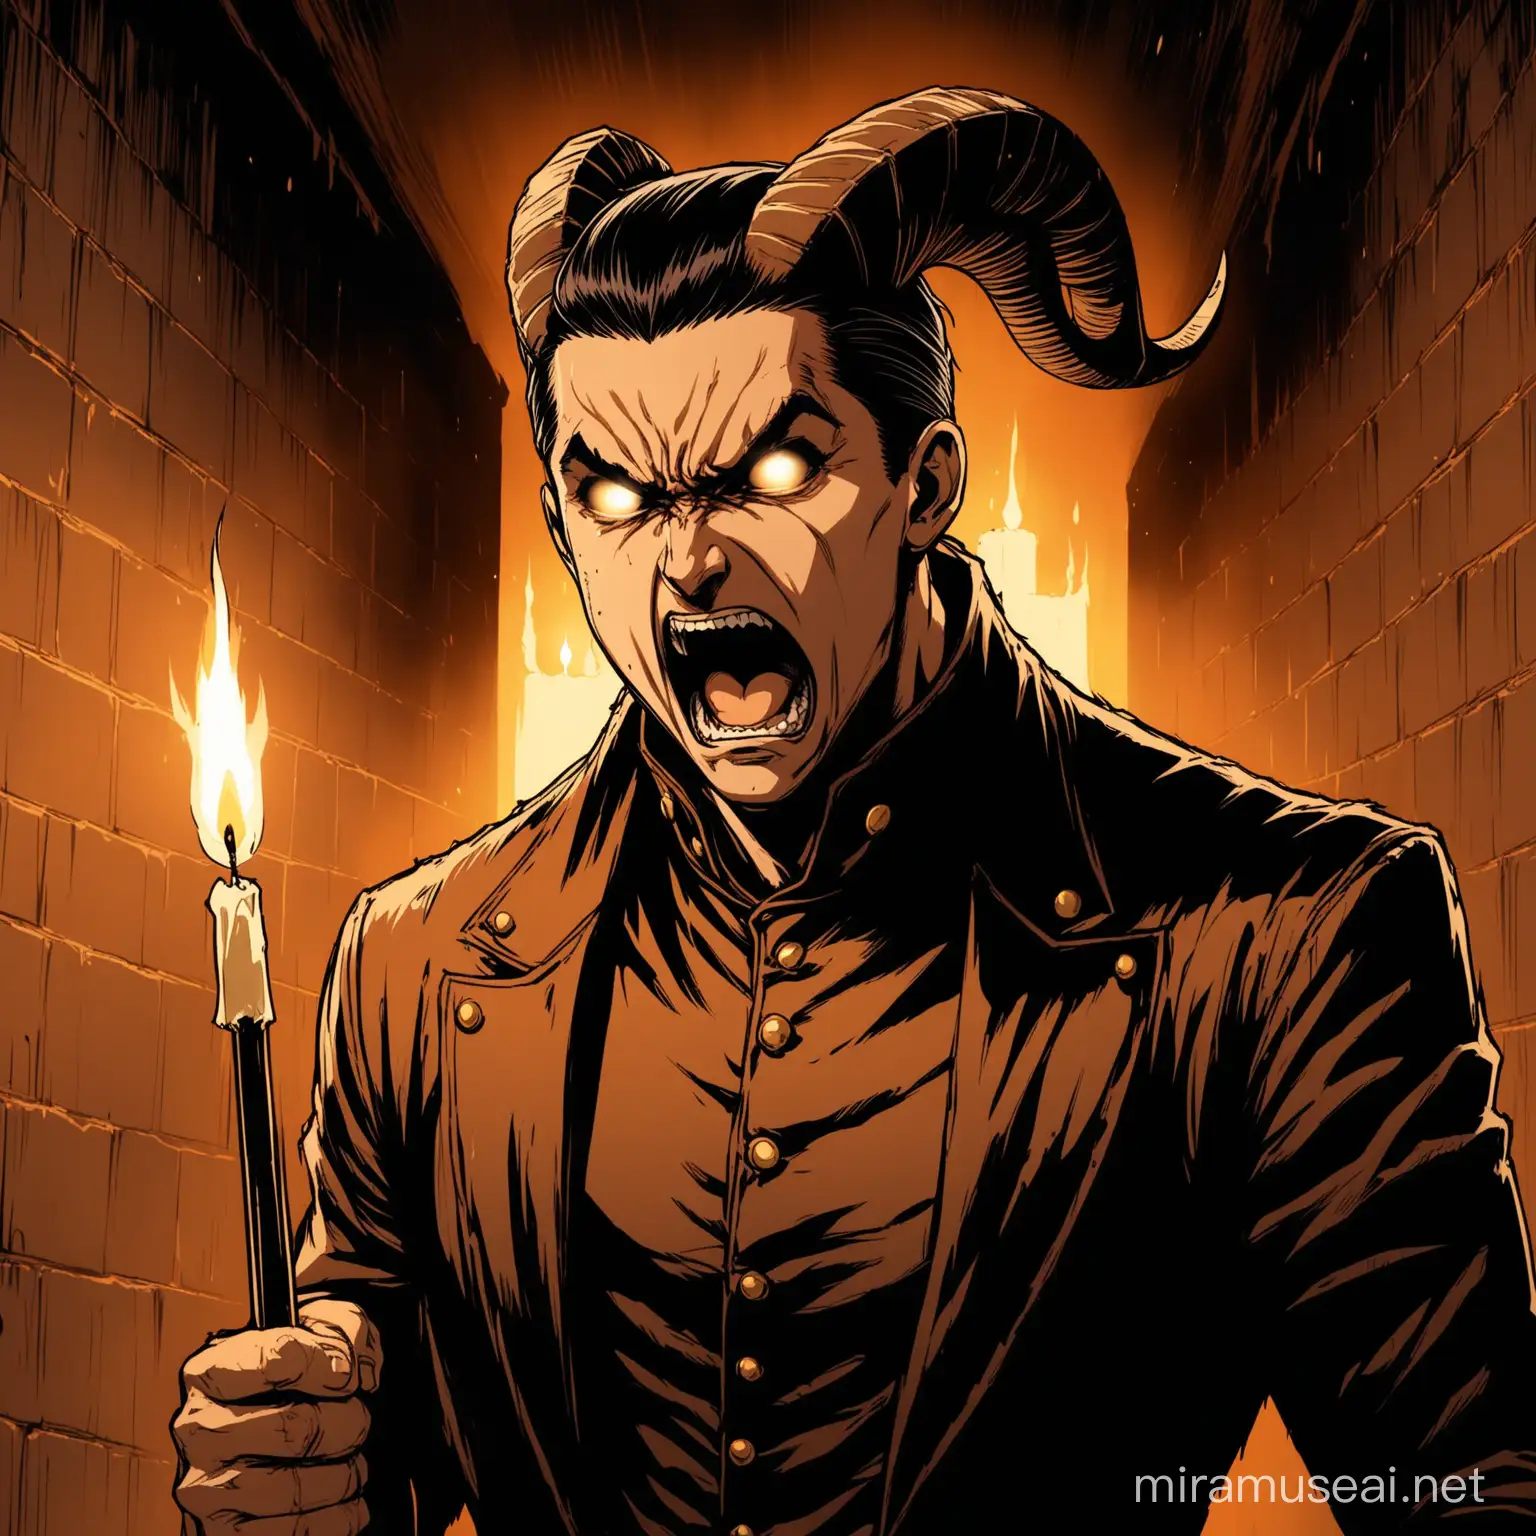 man with brown, slicked back hair, berserk art style, goat horns, black eyes, distressed expression, regal clothes, screaming, dart candlelit hallway background